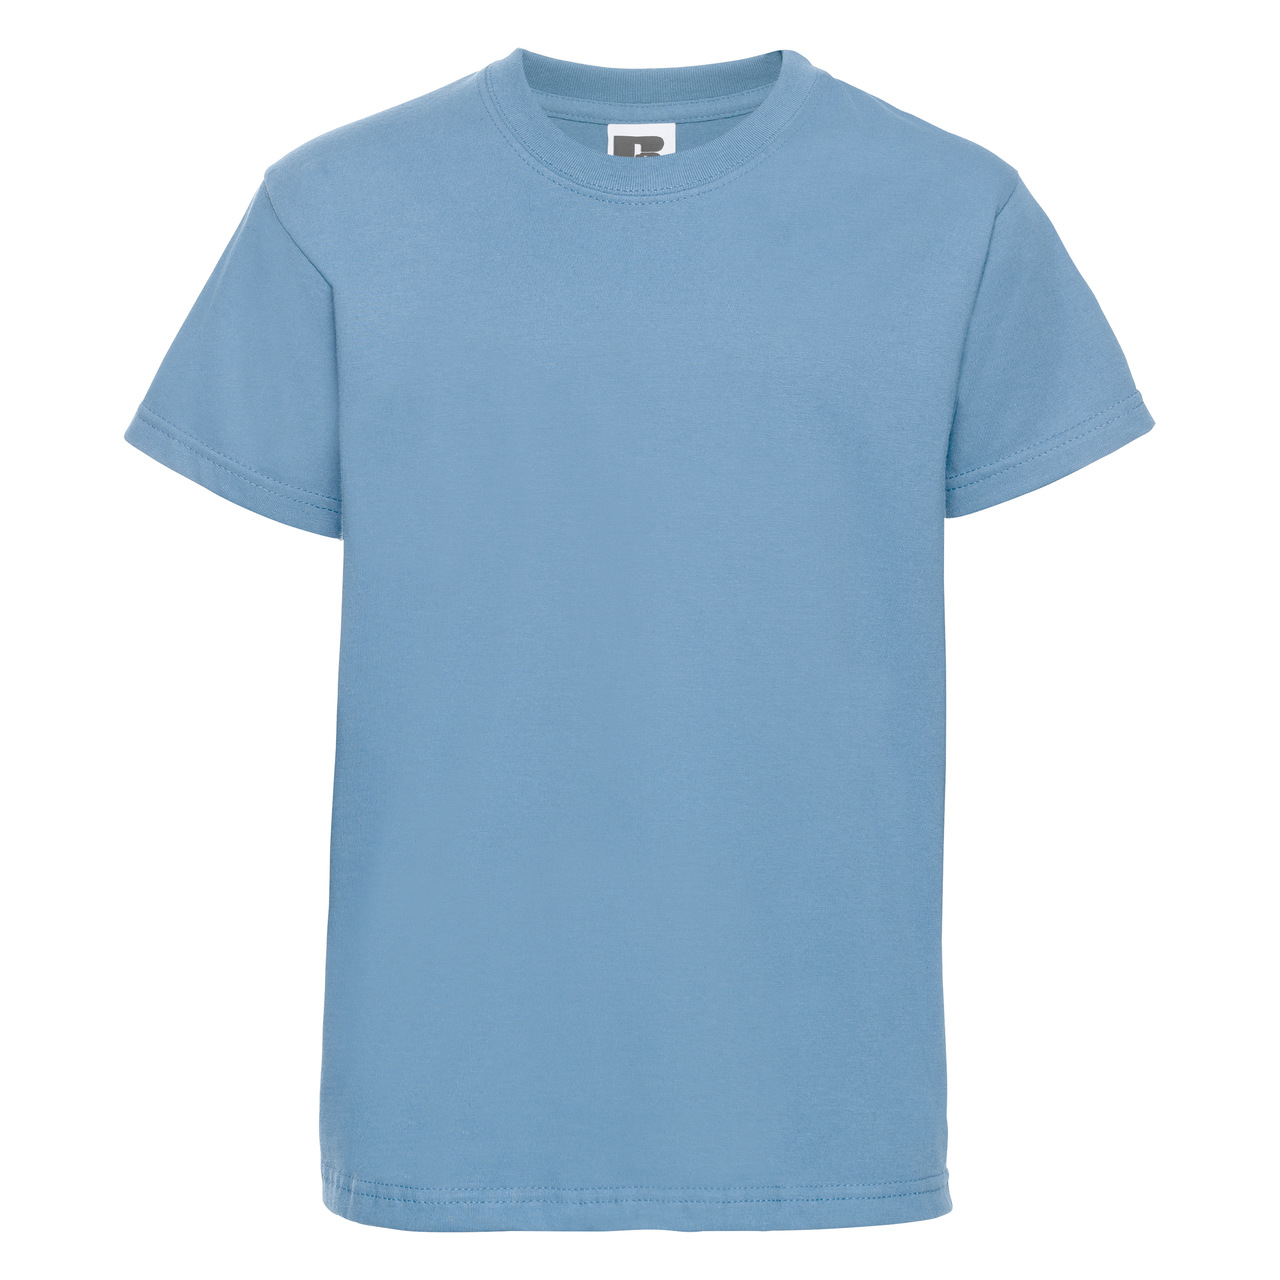 CHILDRENS CLASSIC T-SHIRT | Russell